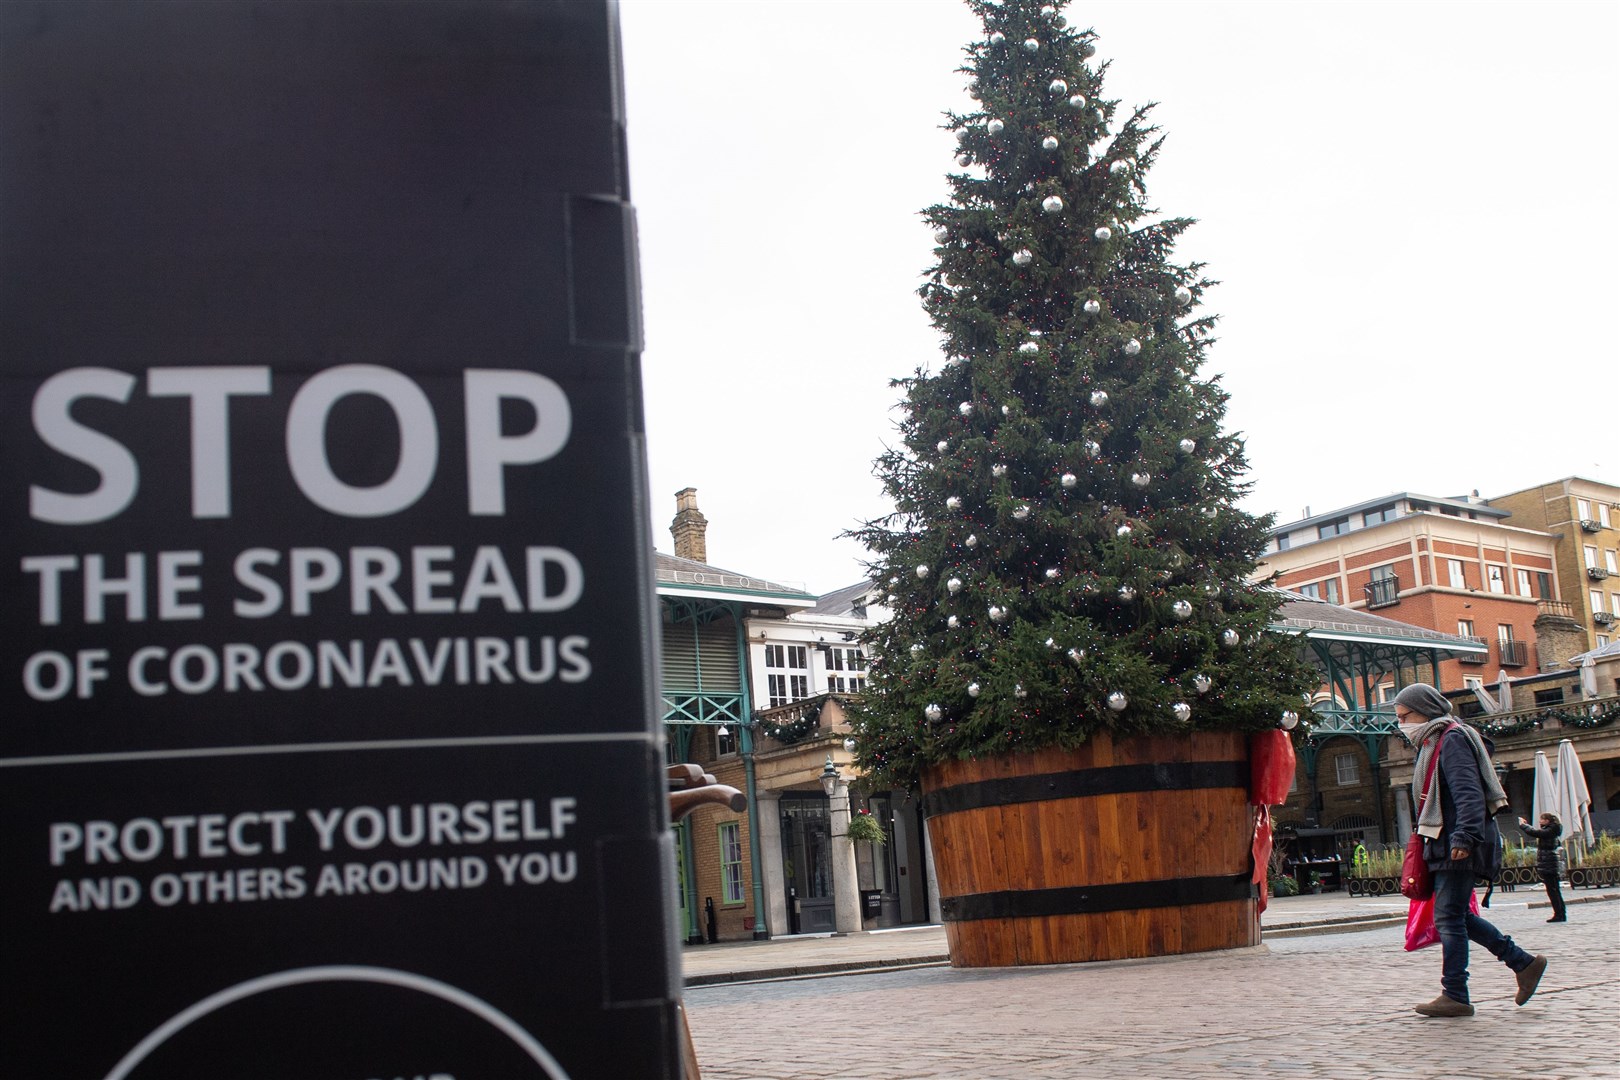 Disinfecting parcels and sending cards early are among scientists’ recommendations for those wanting to take extra coronavirus precautions this Christmas (Dominic Lipsinki/PA)